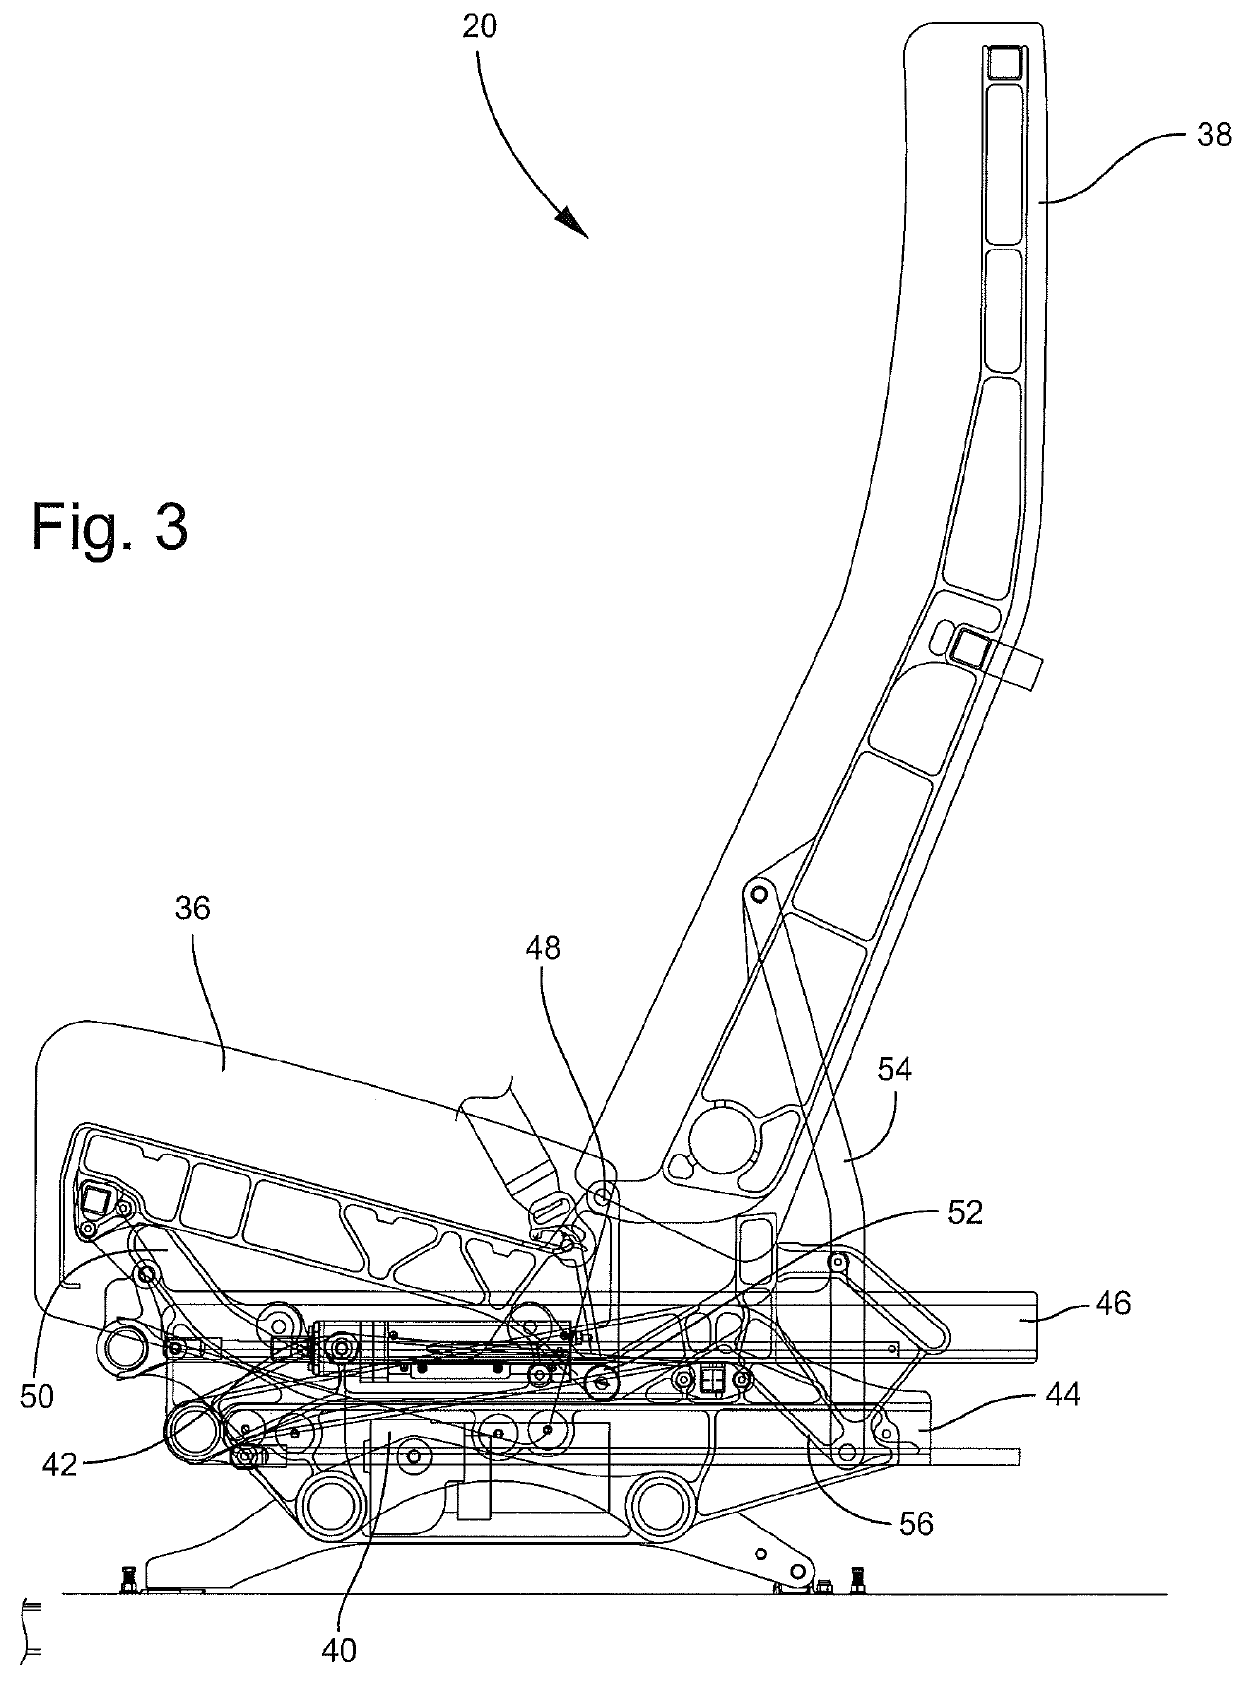 Aircraft seat employing dual actuators for seat translaton and seat recline